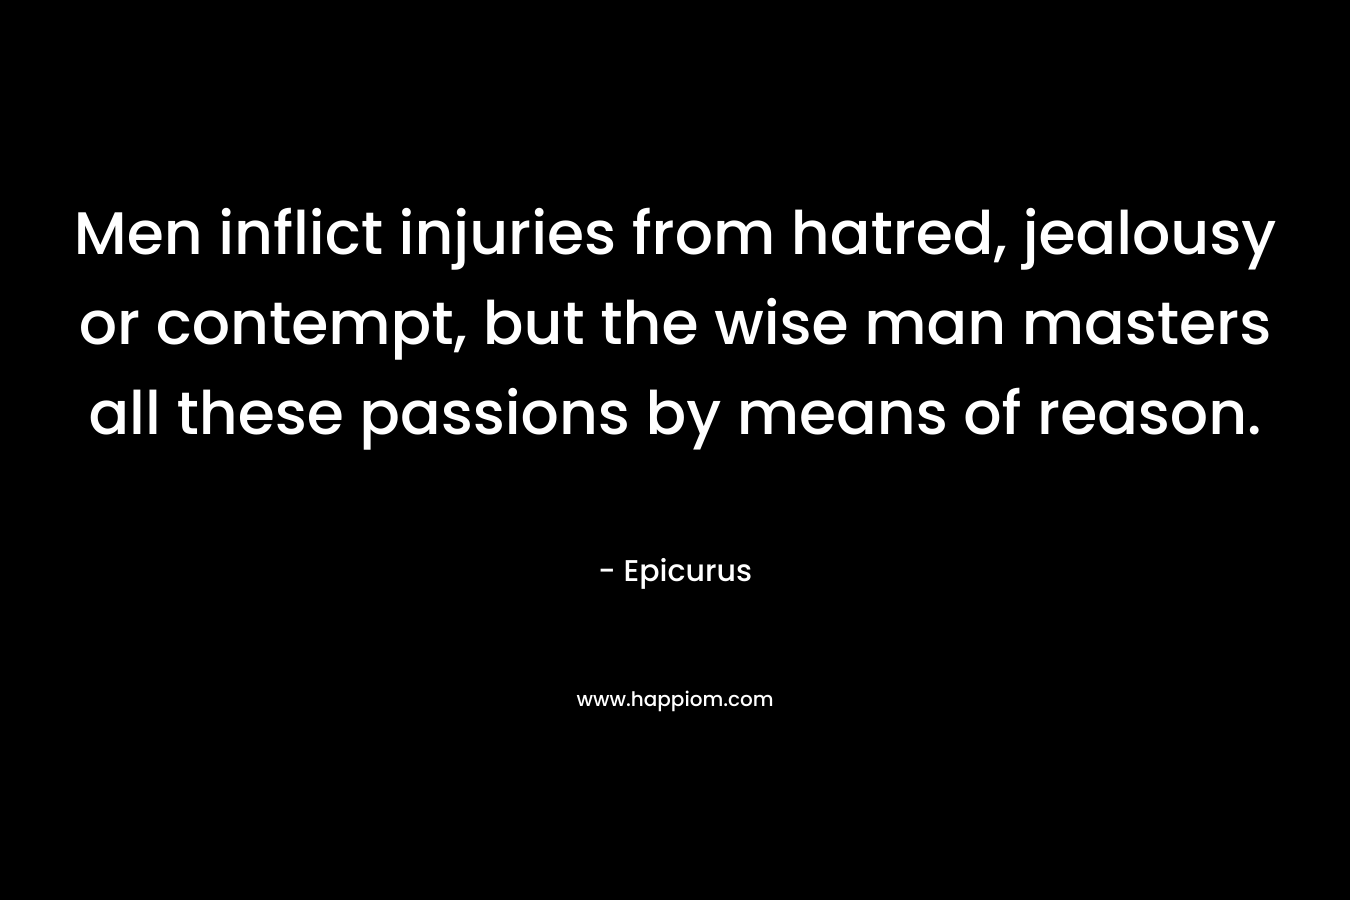 Men inflict injuries from hatred, jealousy or contempt, but the wise man masters all these passions by means of reason. – Epicurus